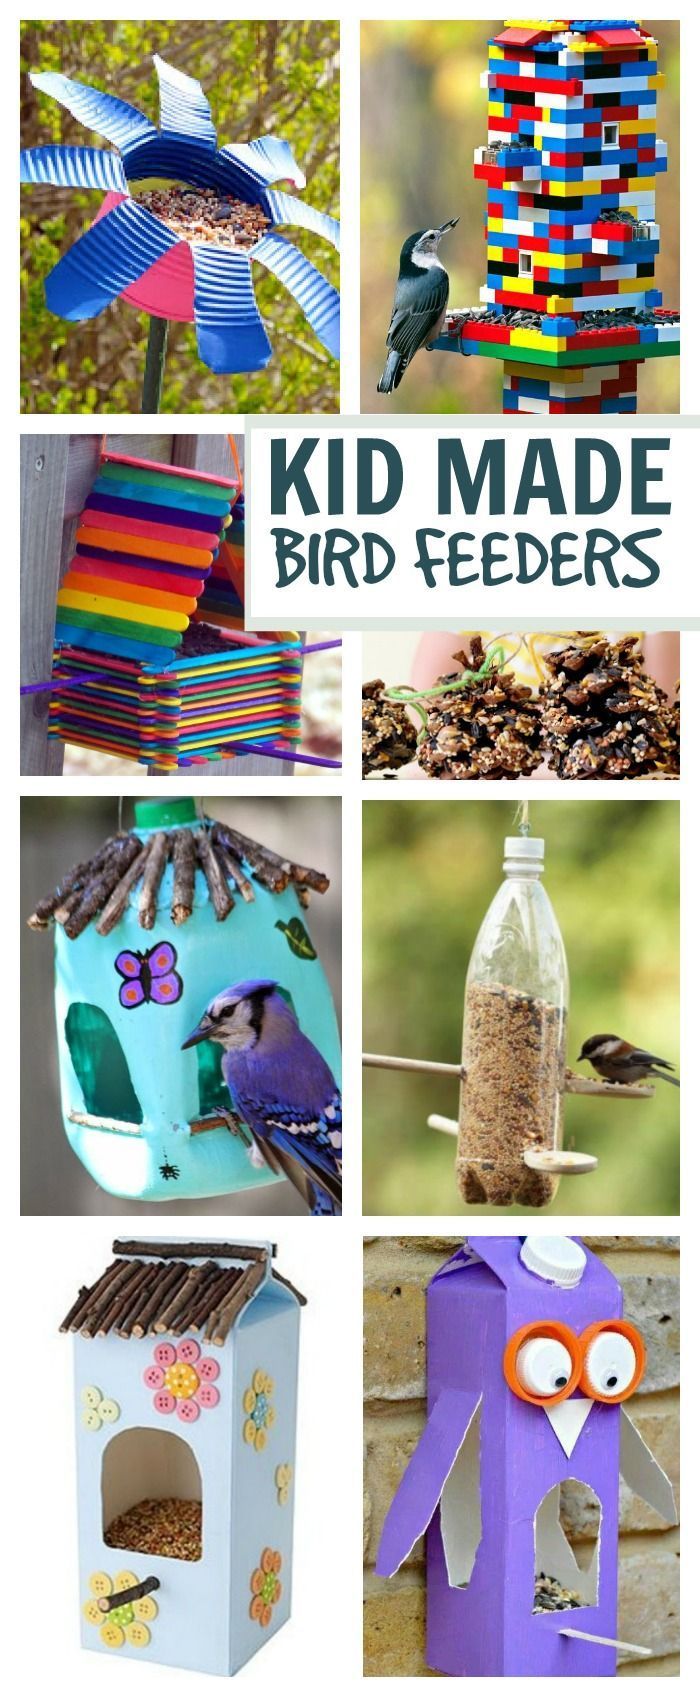 18 TOTALLY AWESOME bird feeder crafts for kids. These are SO COOL! I love the Lego bird feeder!